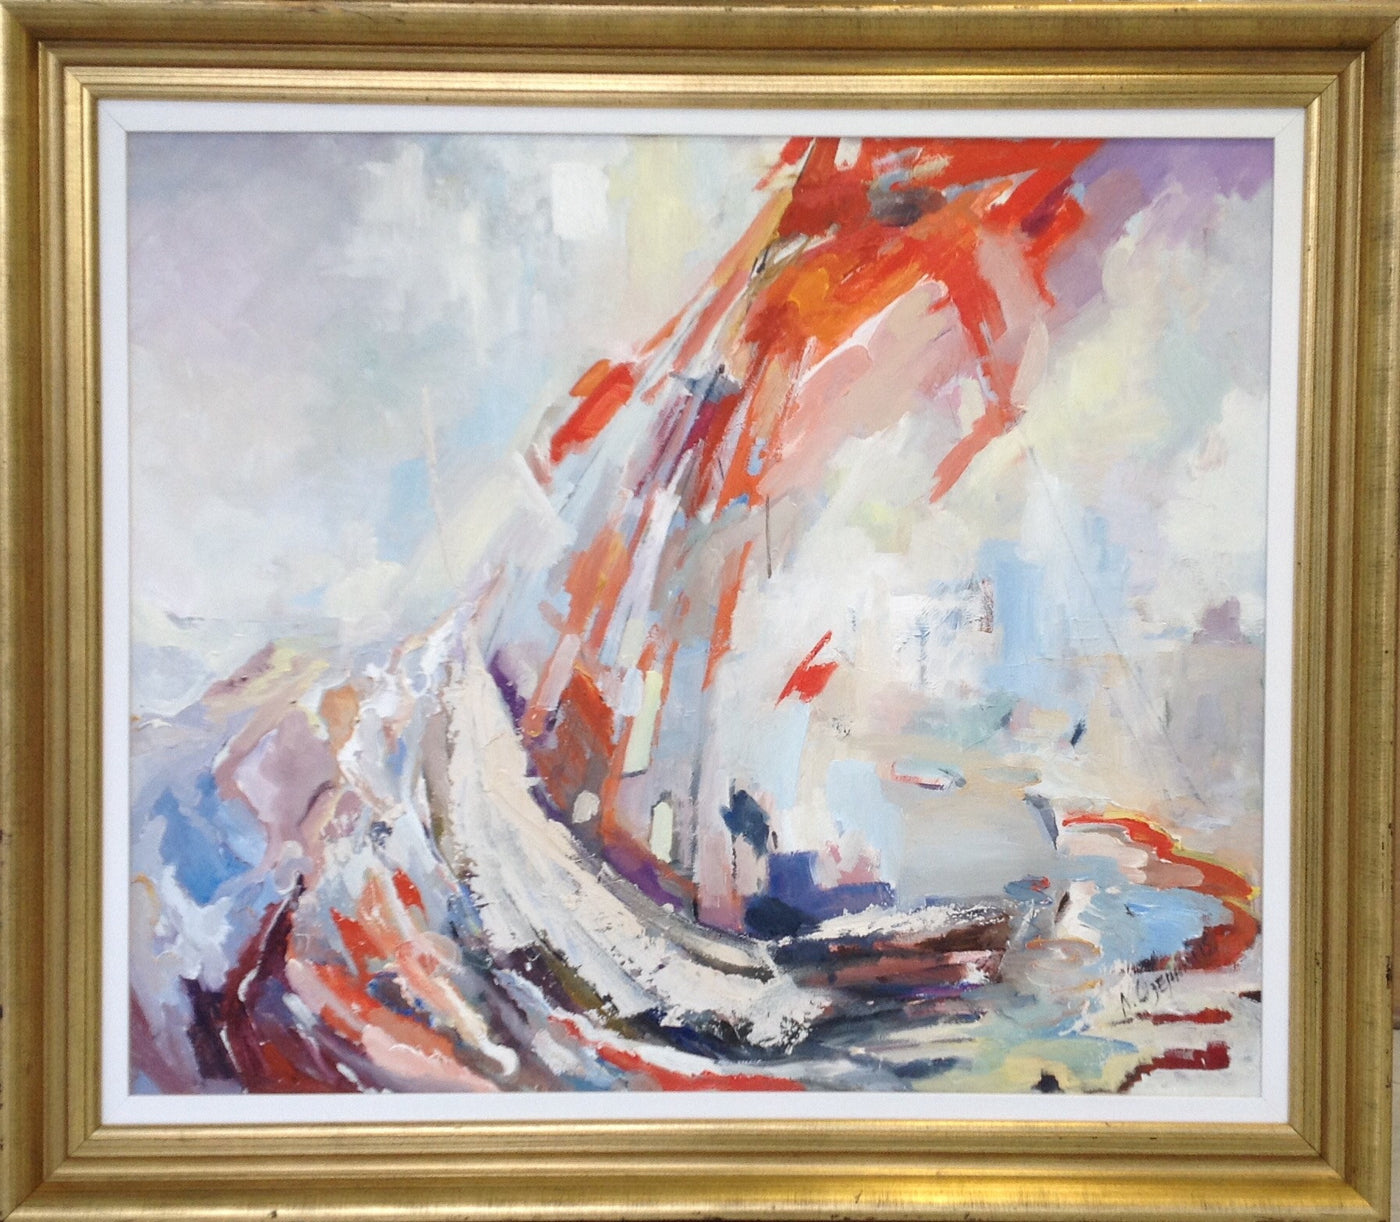 Yachts In A Swell by Andriy Ozernyy - Green Gallery